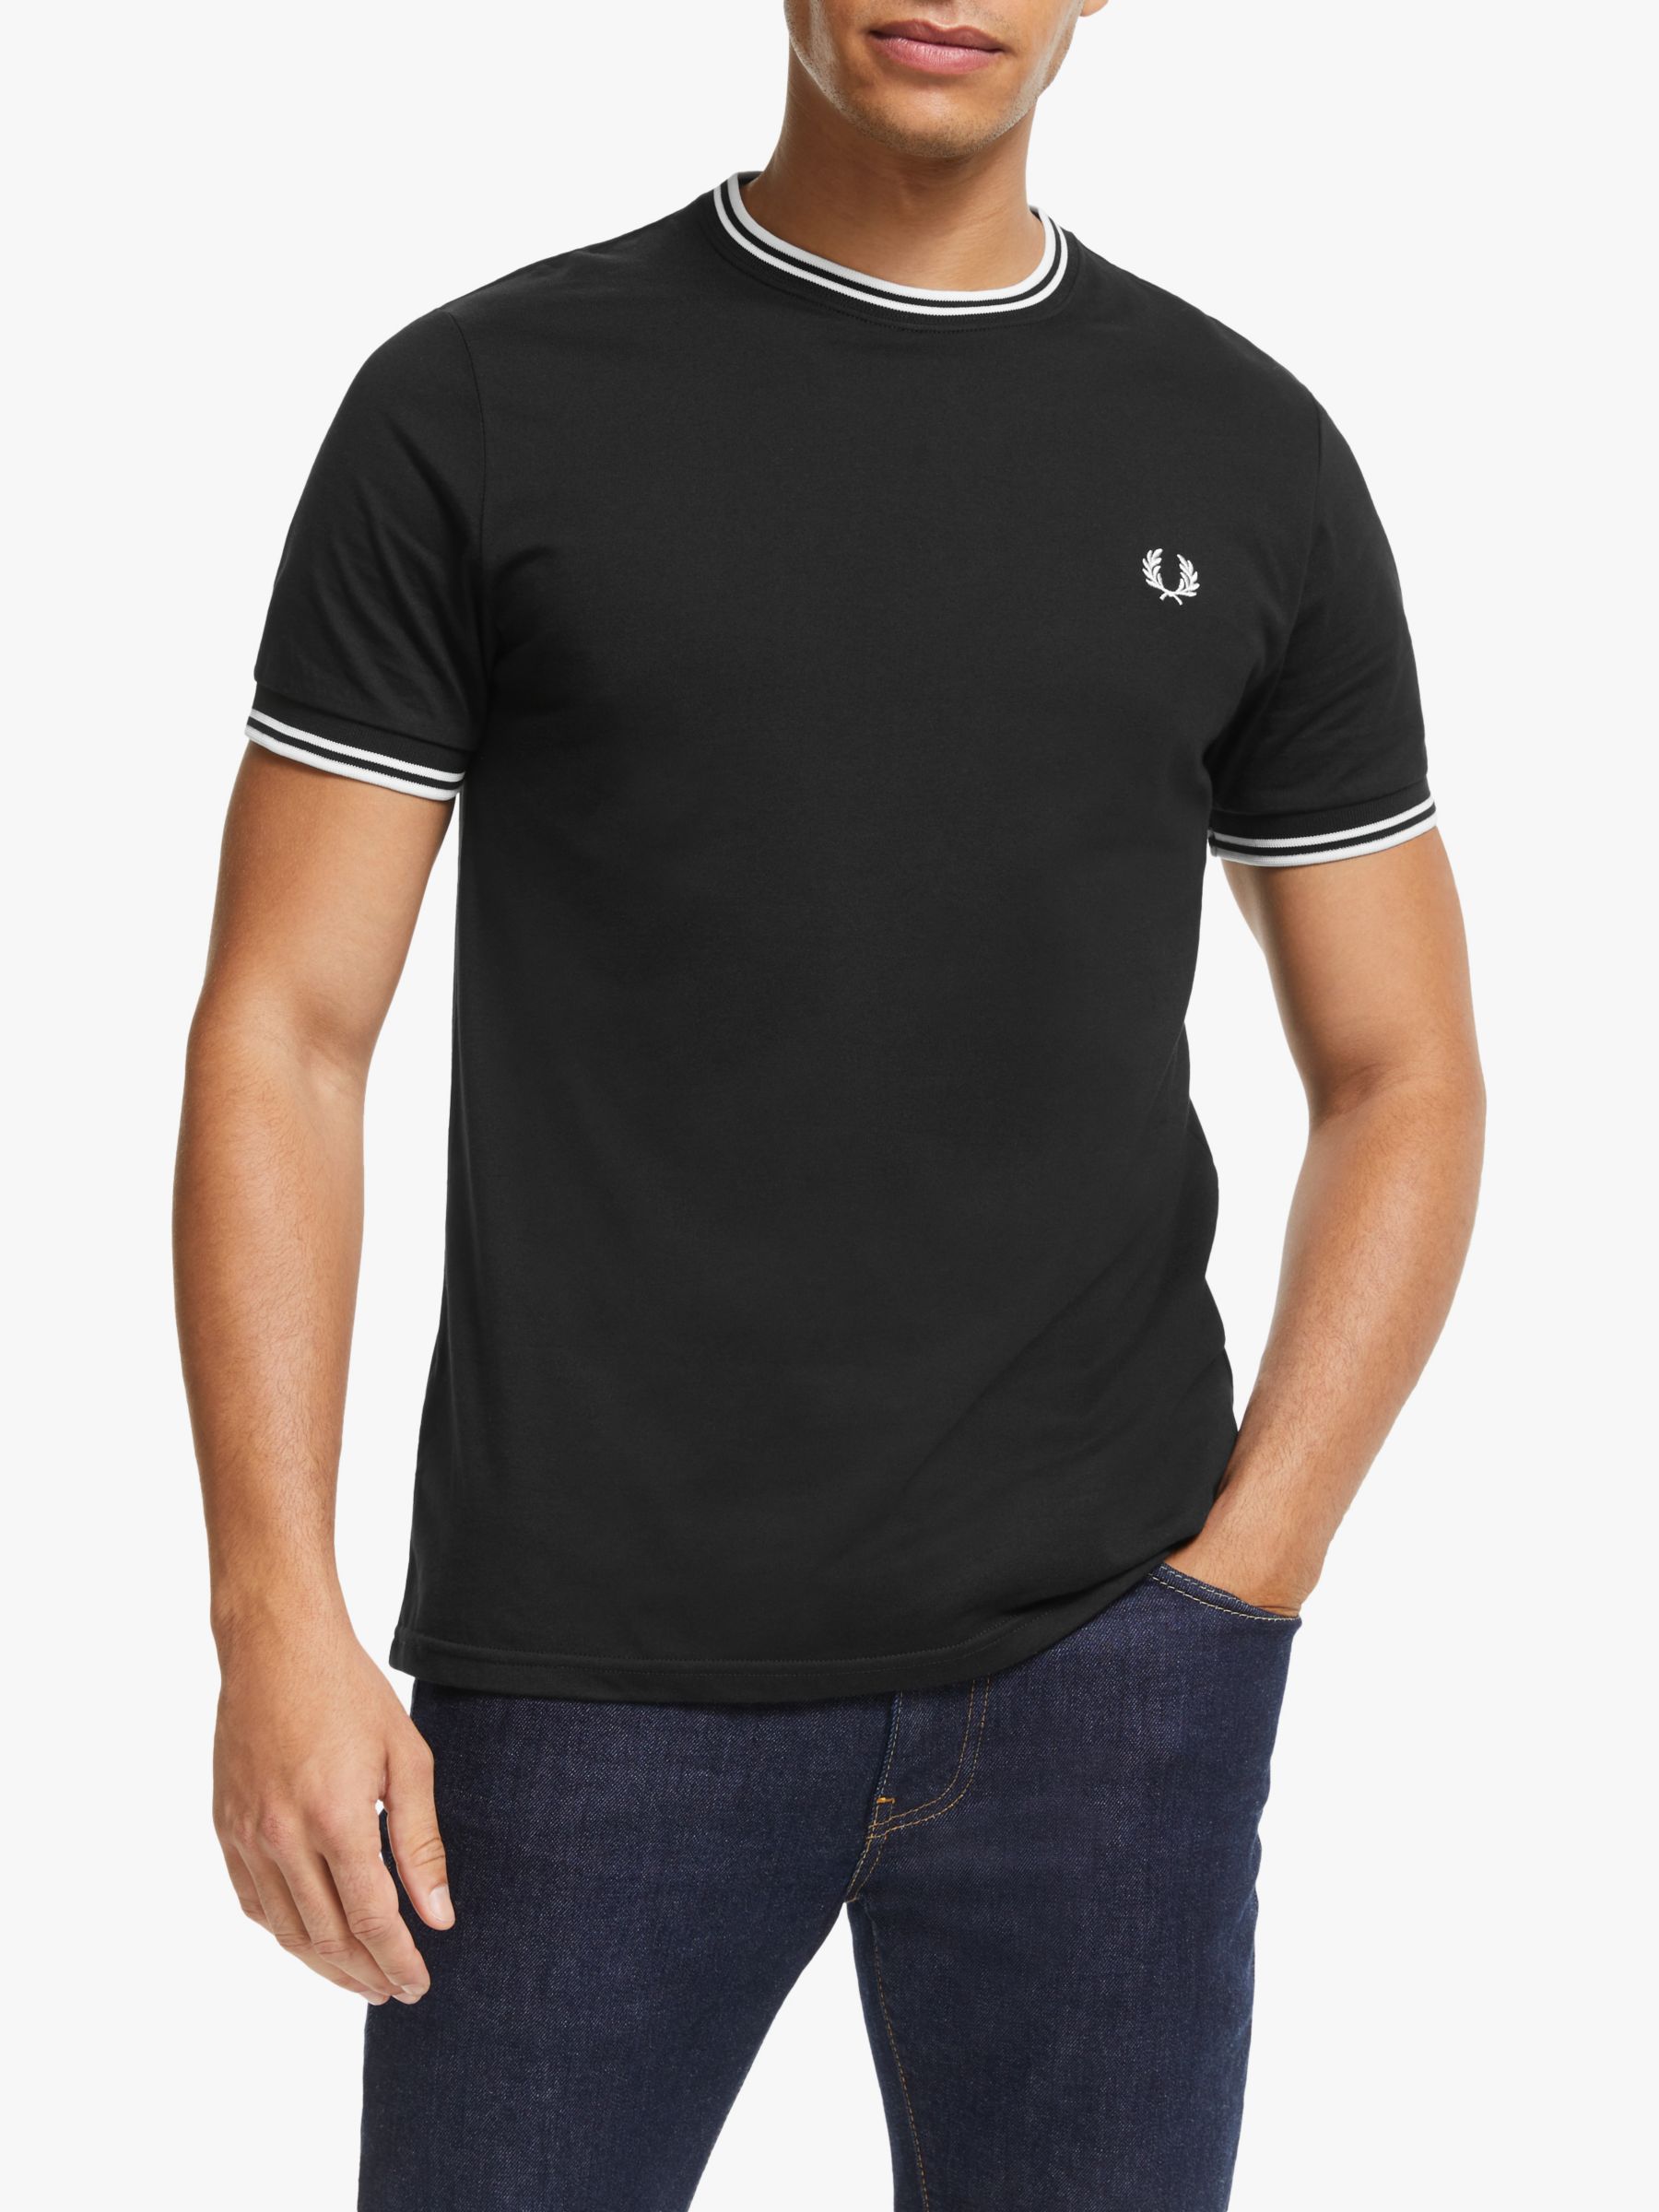 Fred Perry Twin Tipped T-Shirt, Black at John Lewis & Partners